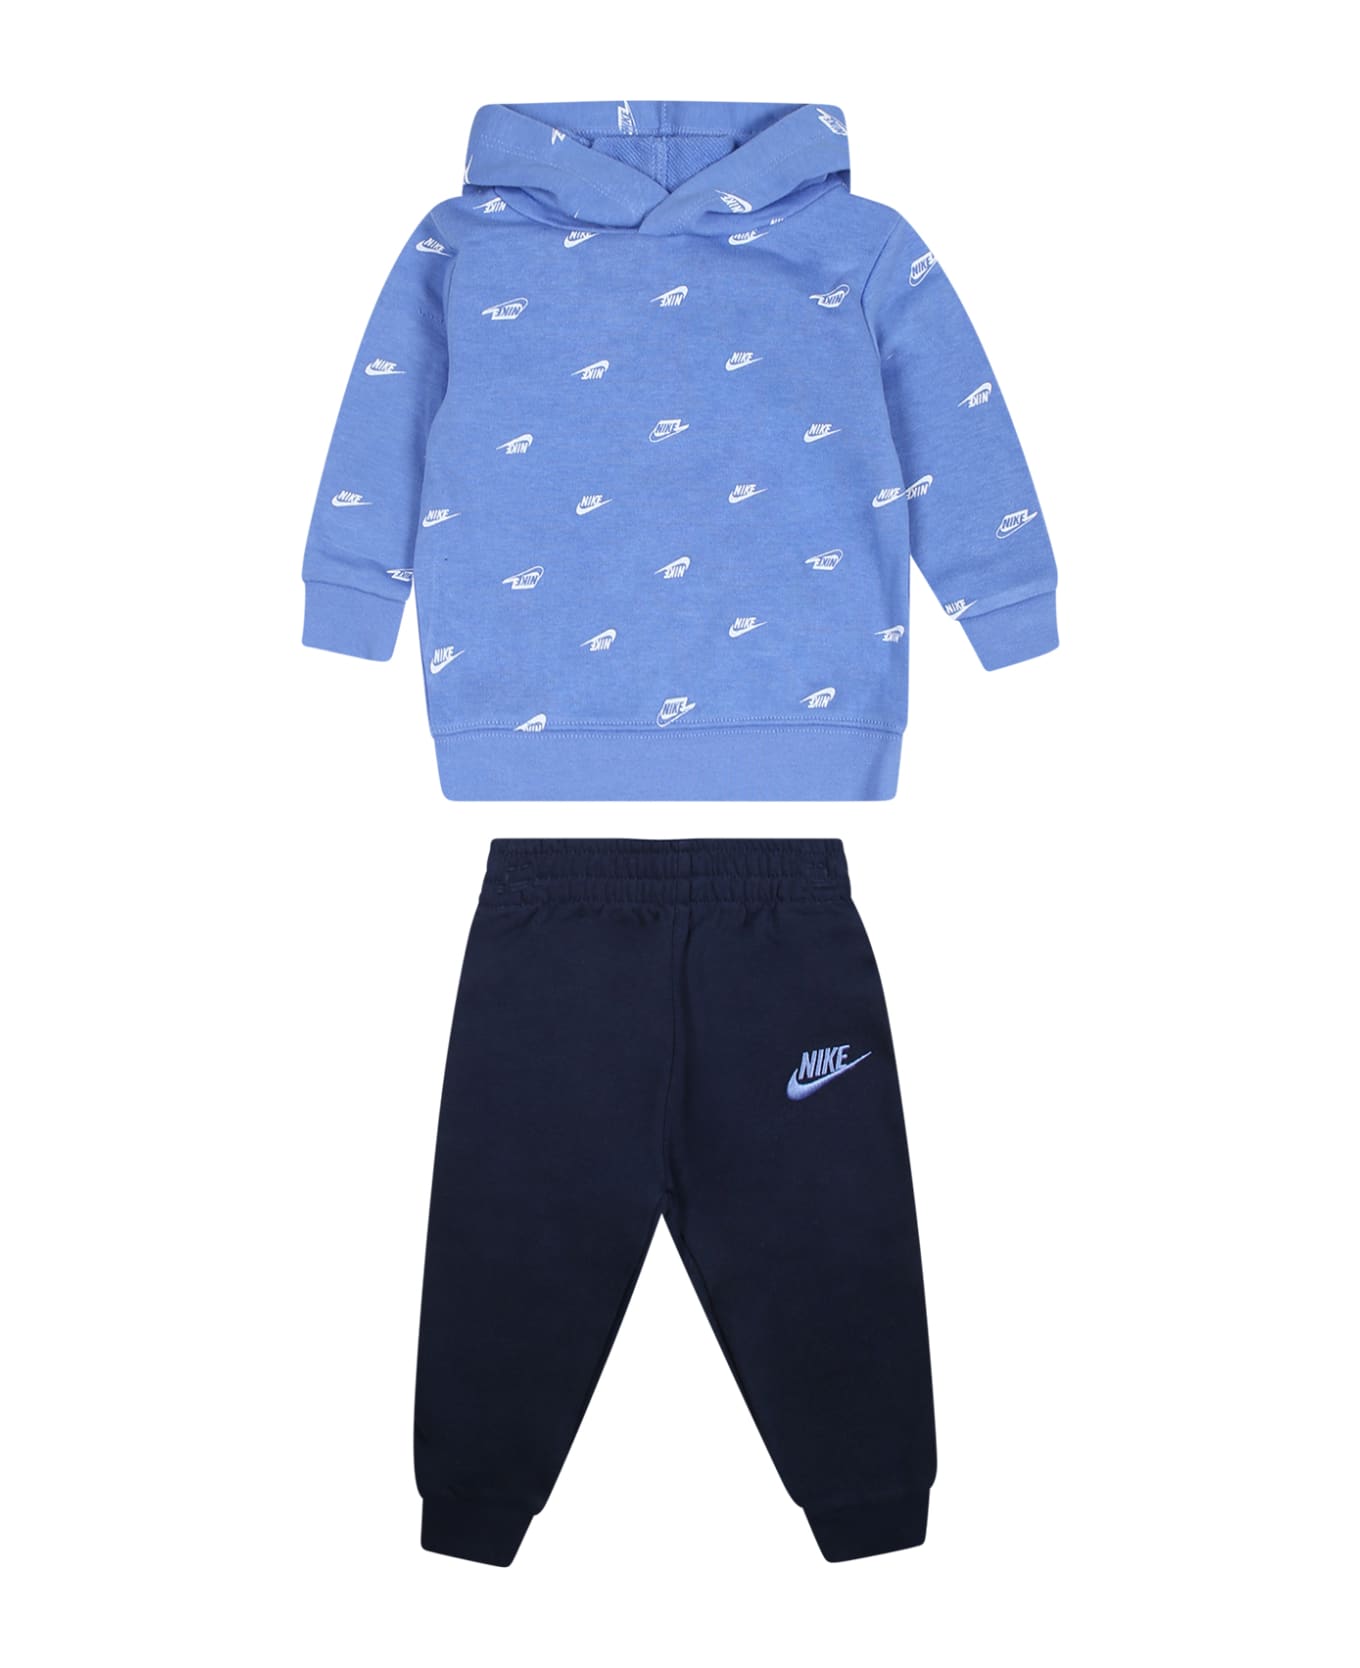 Nike Blue Suit For Baby Boy With Logo - Multicolor ボトムス